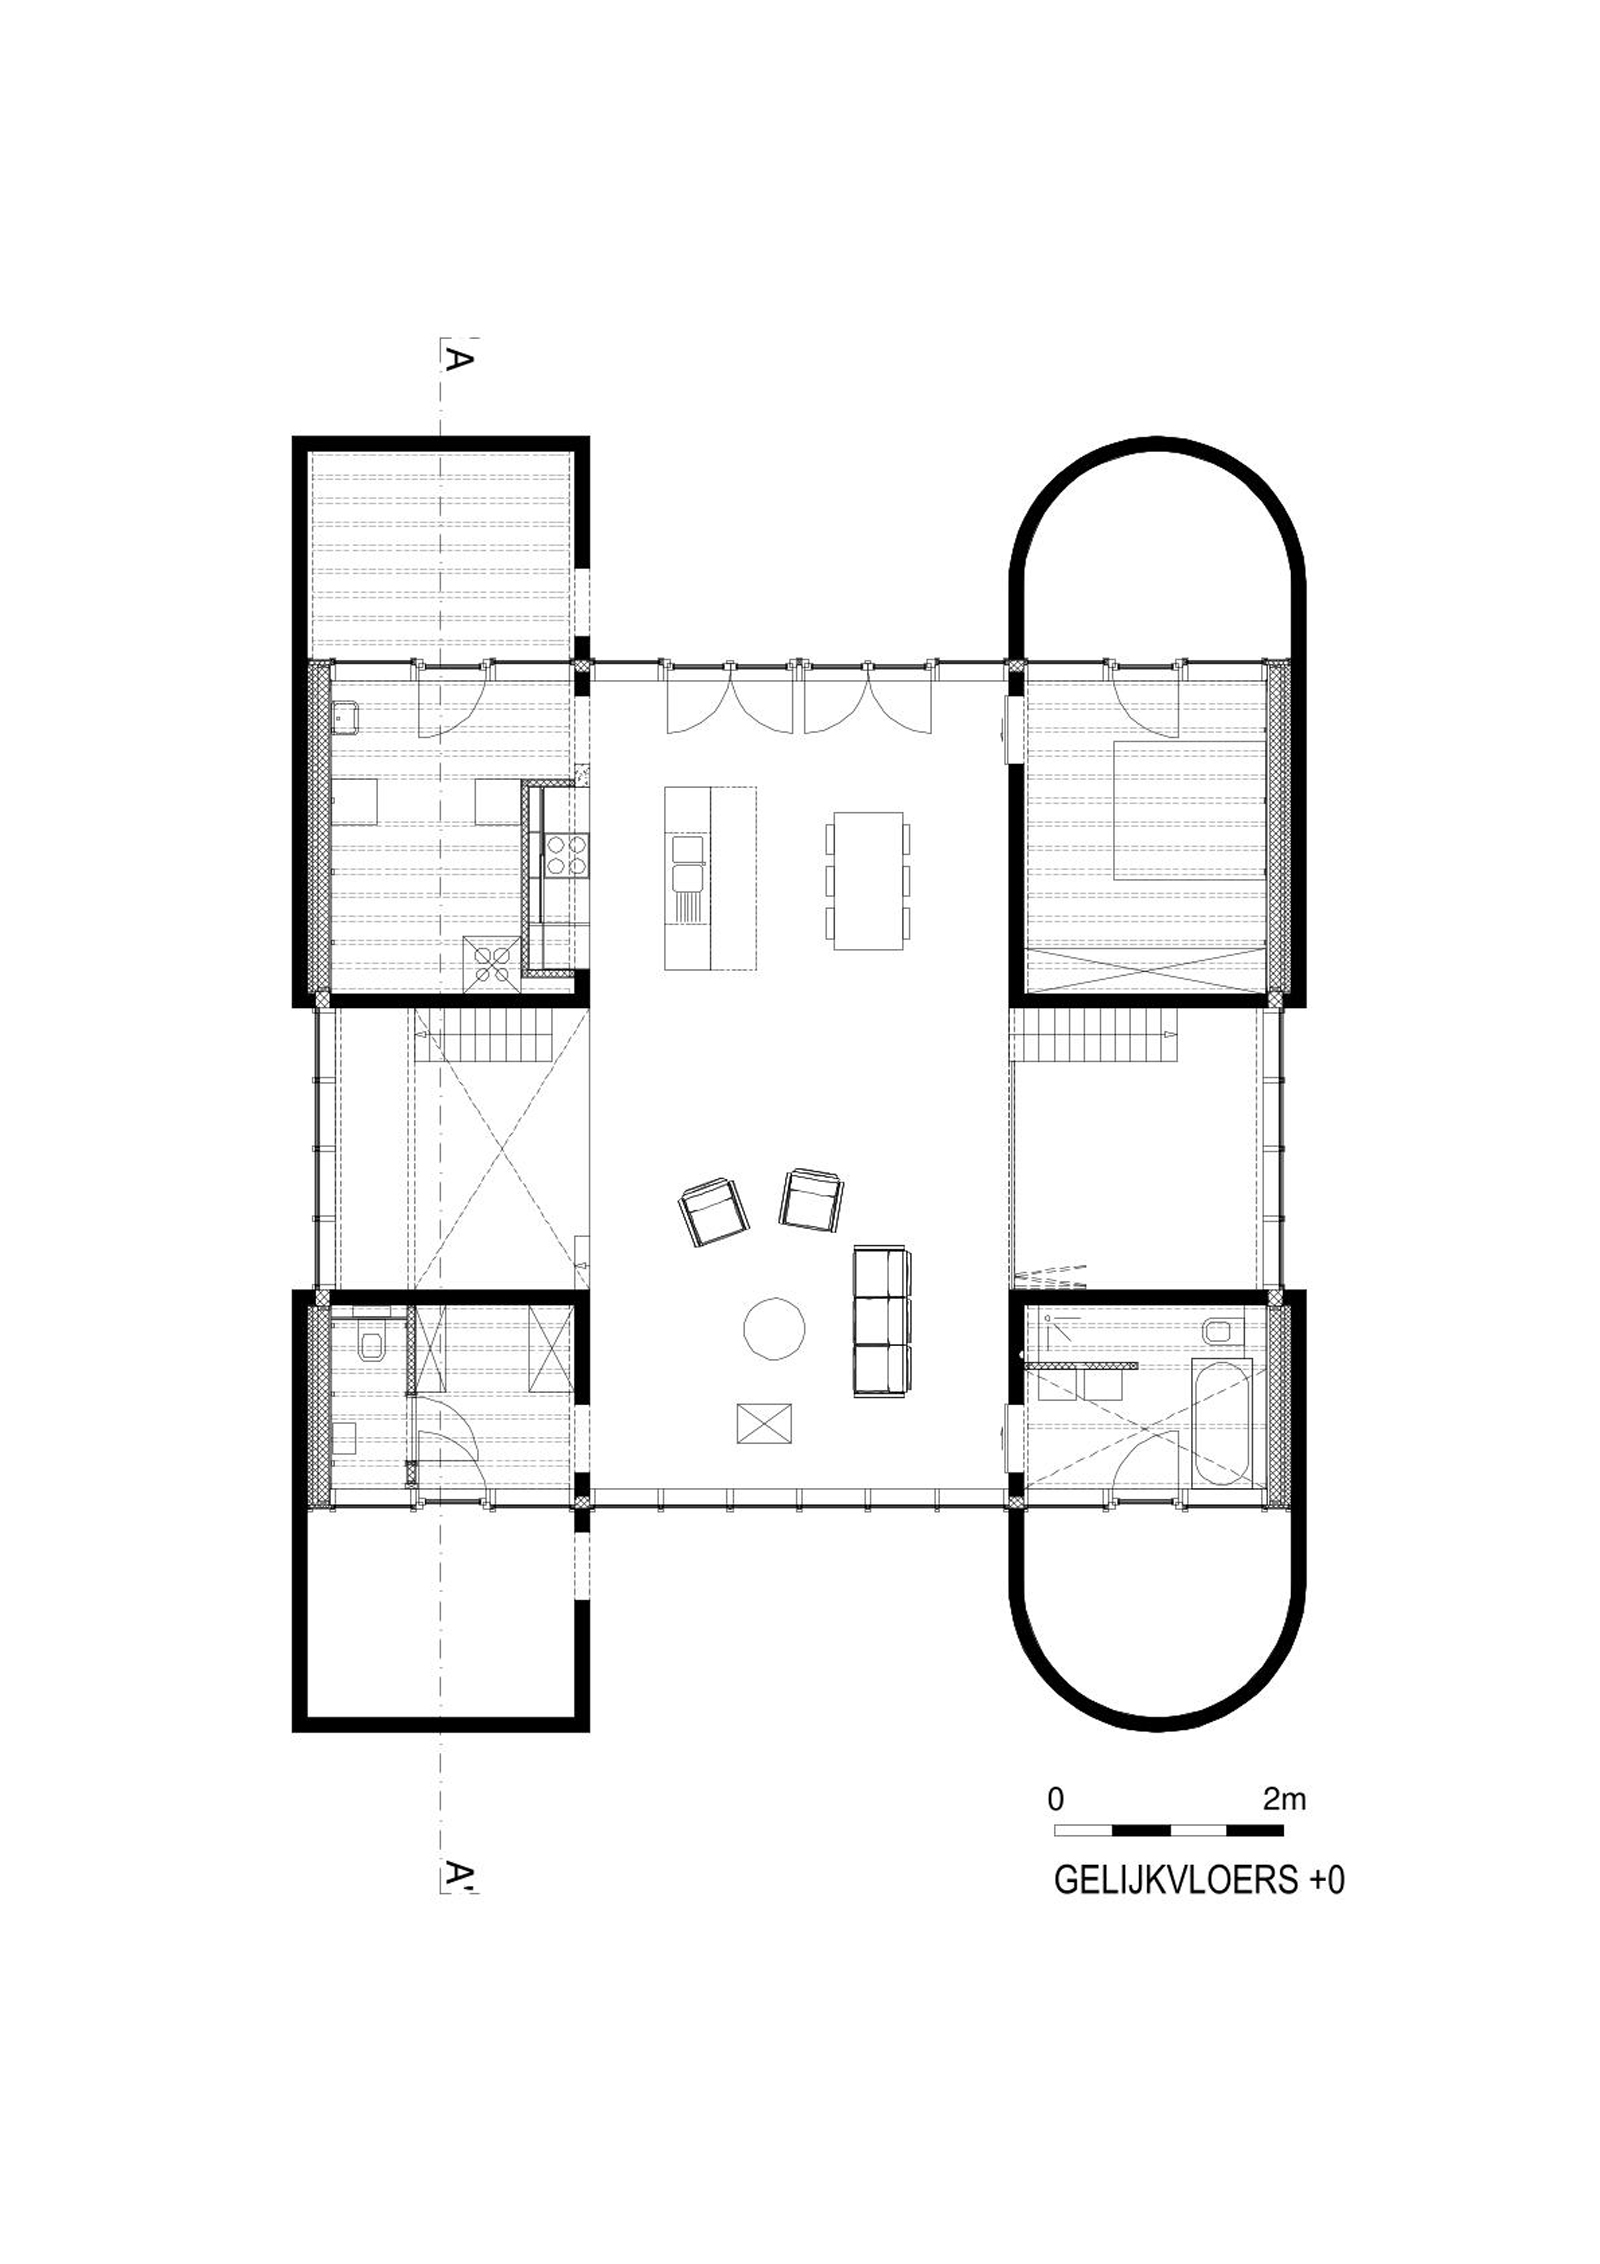 Image of 20220308 BLAF Architects fmM 13.1 in fmM House - Cosentino